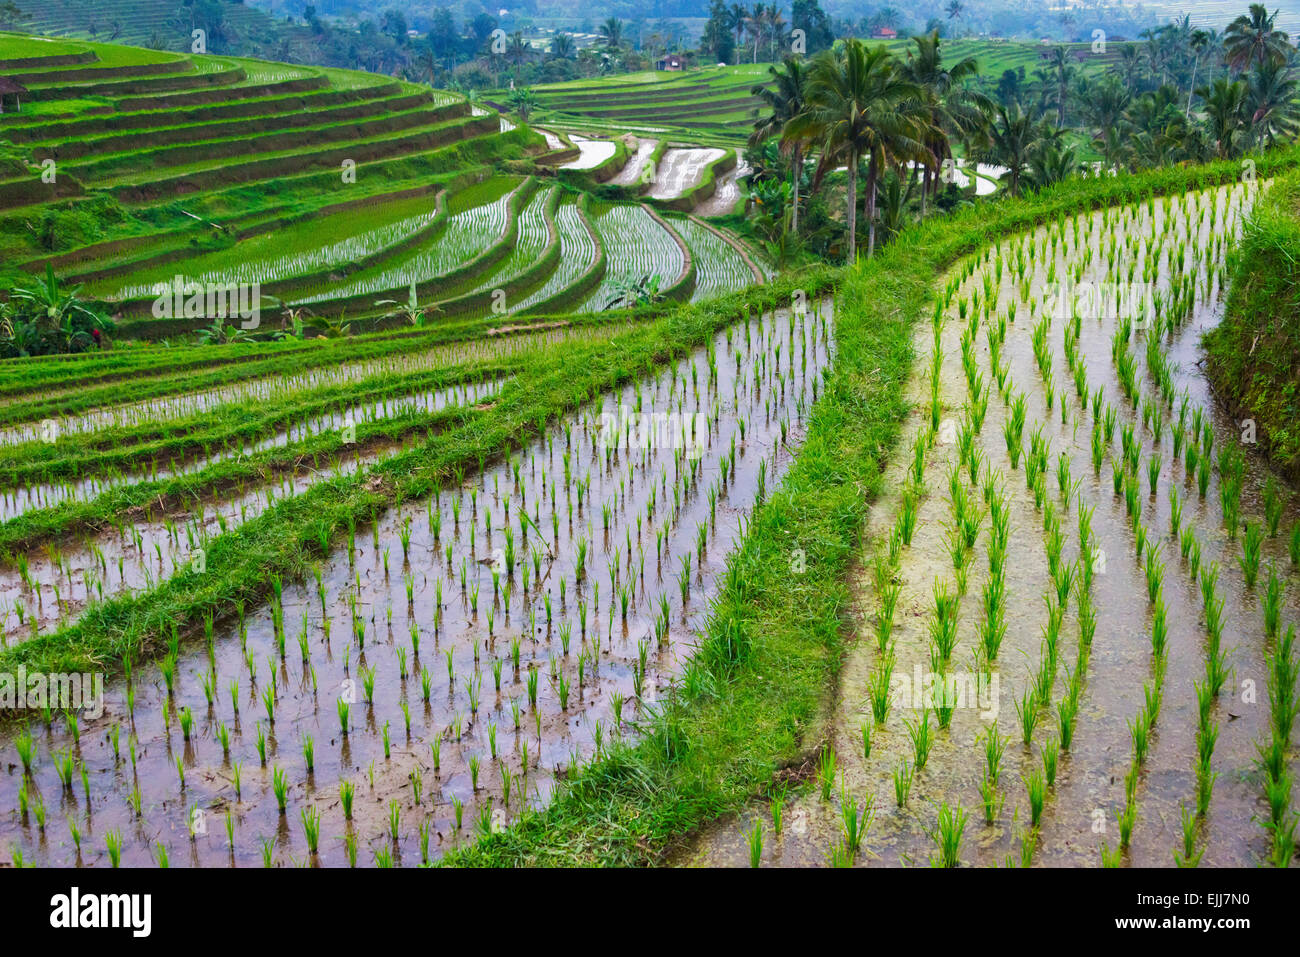 Water filled rice terraces, Bali island, Indonesia Stock Photo